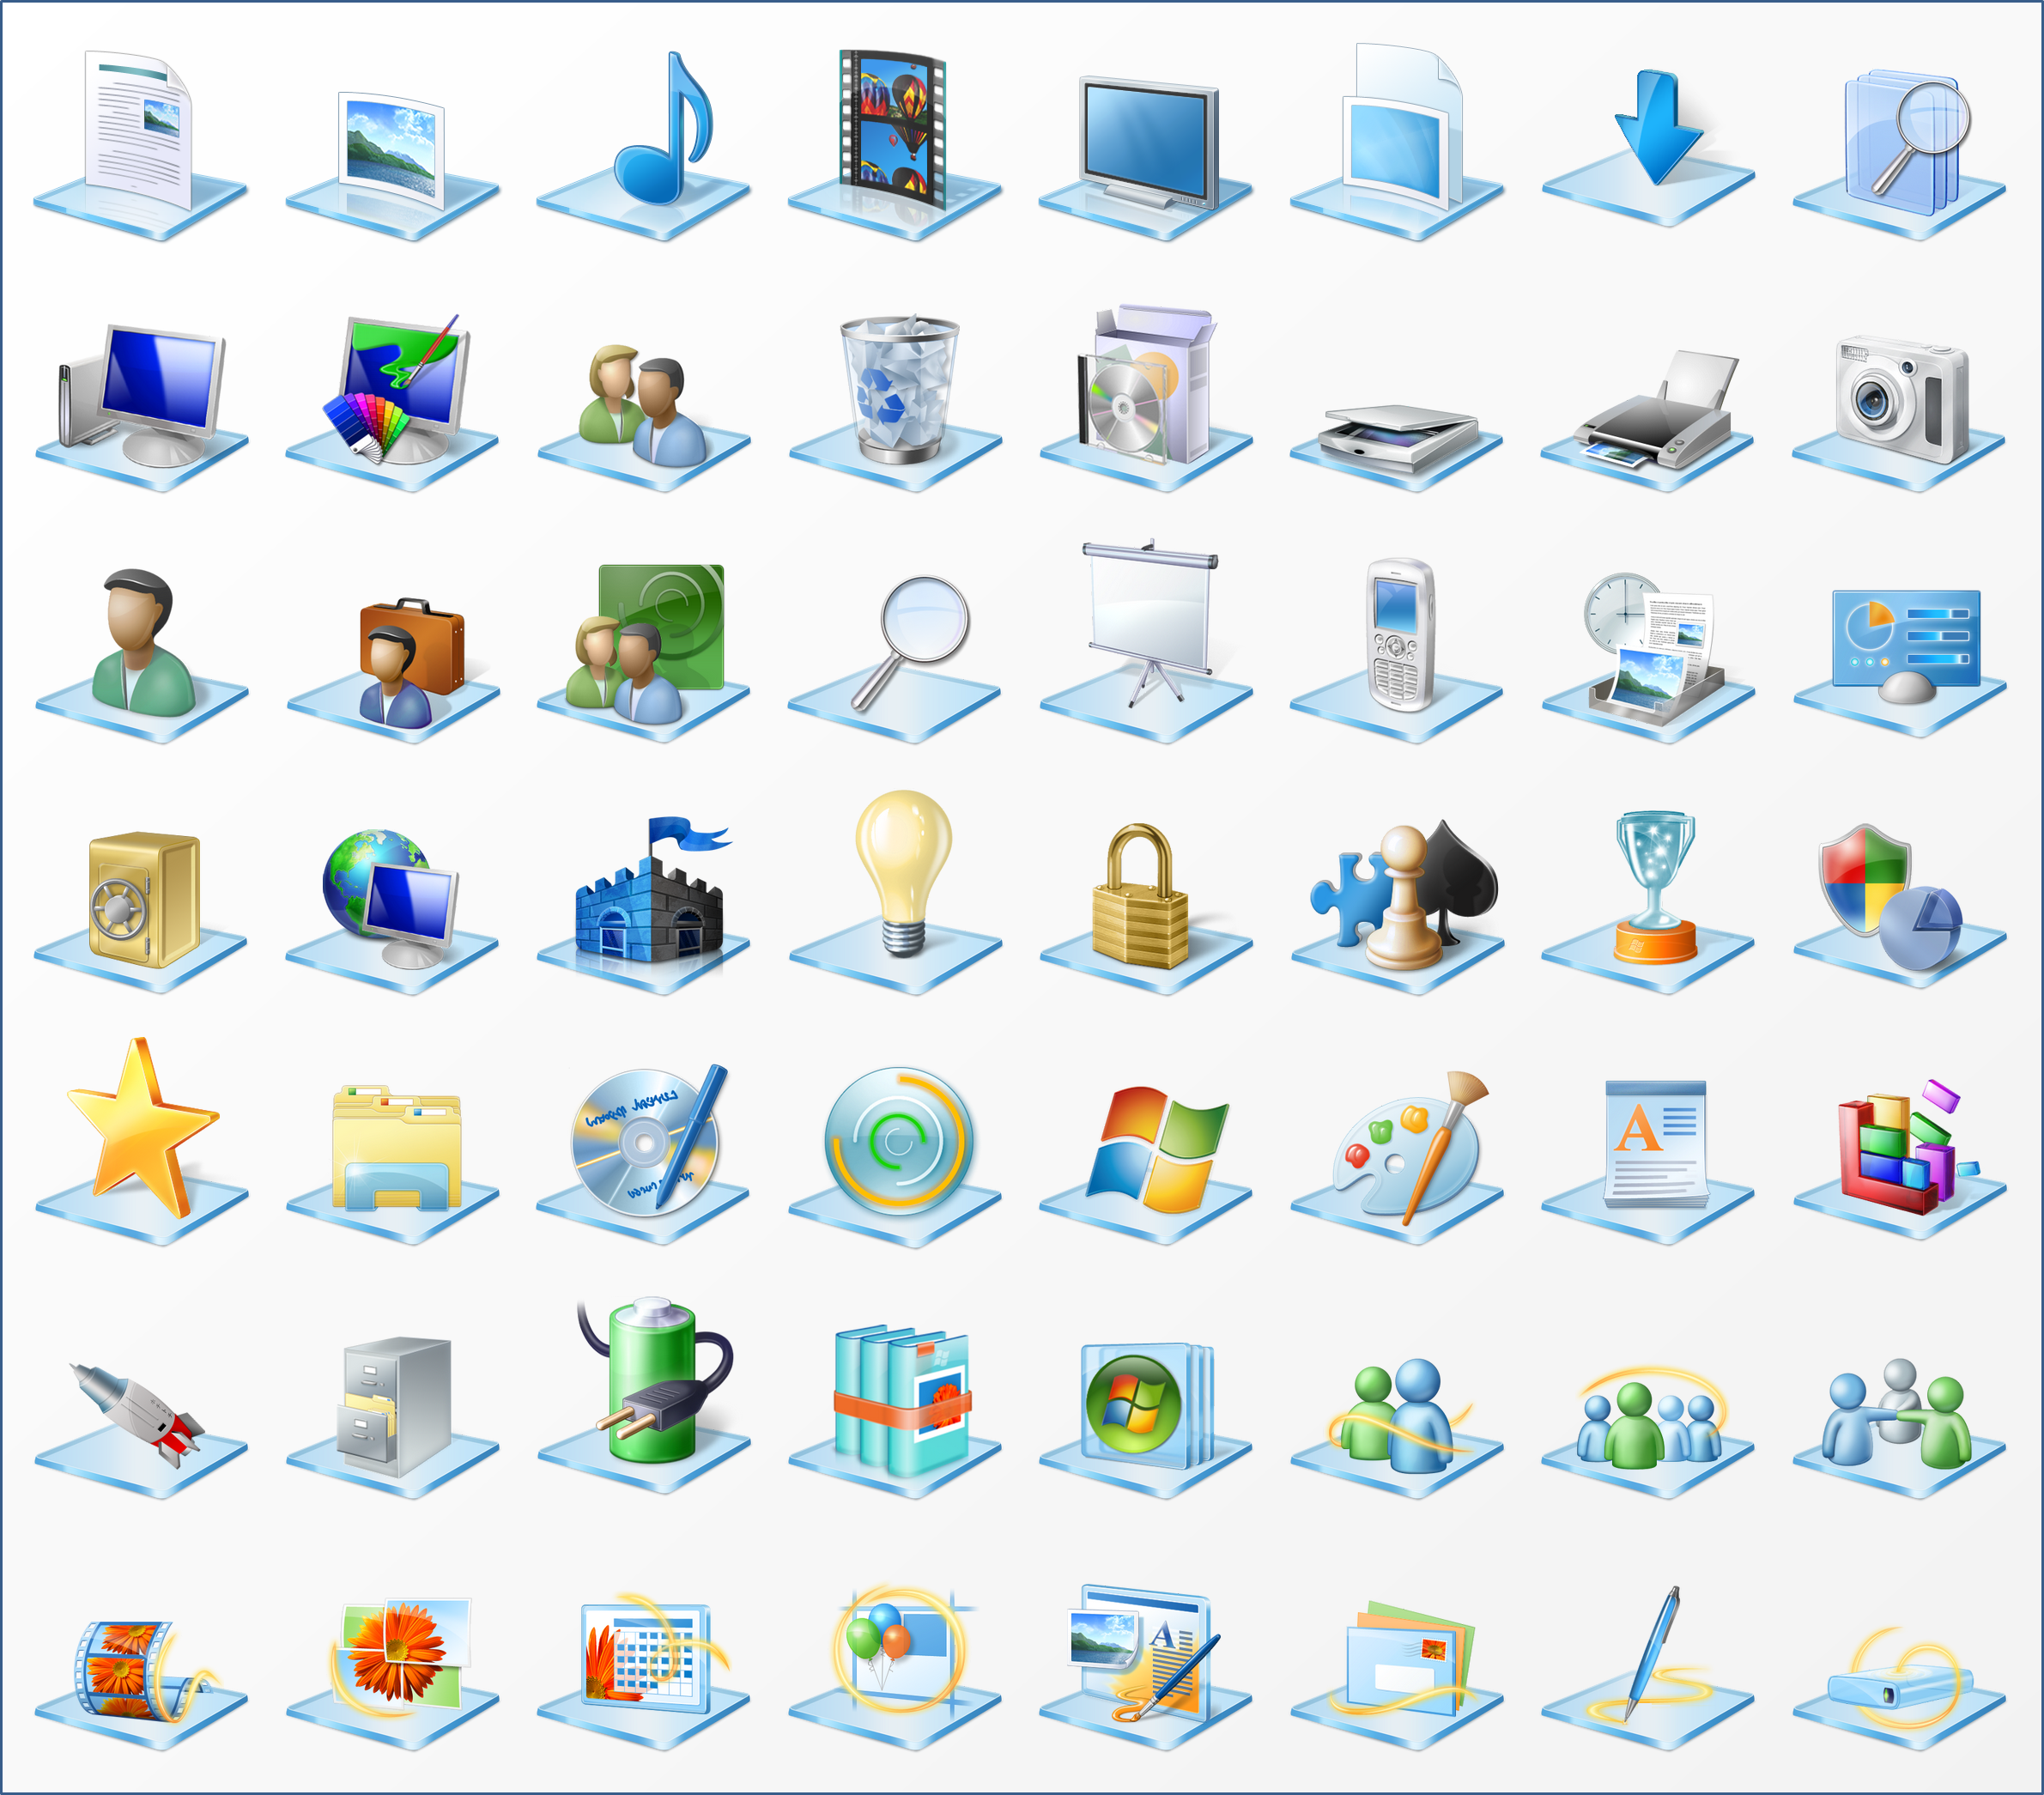 17 Windows Libraries Icon Images